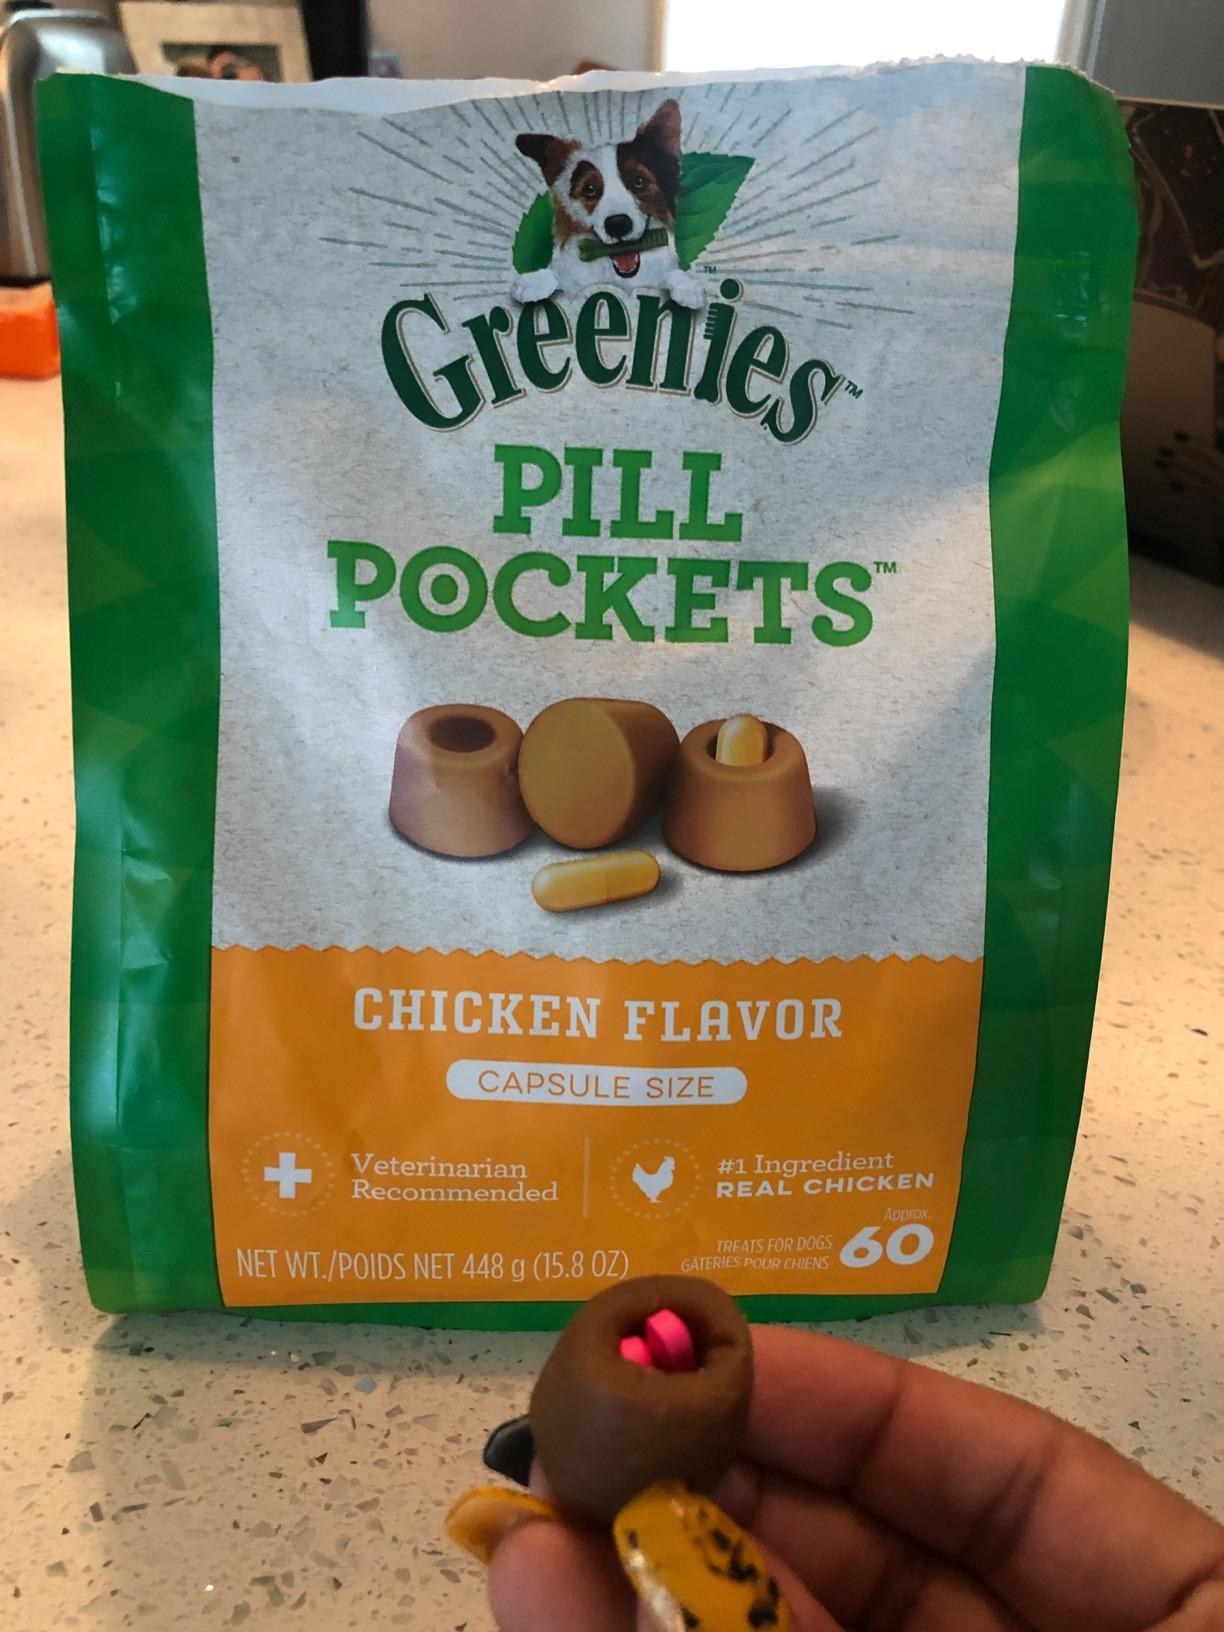 reviewer photo of the Greenies pill pockets